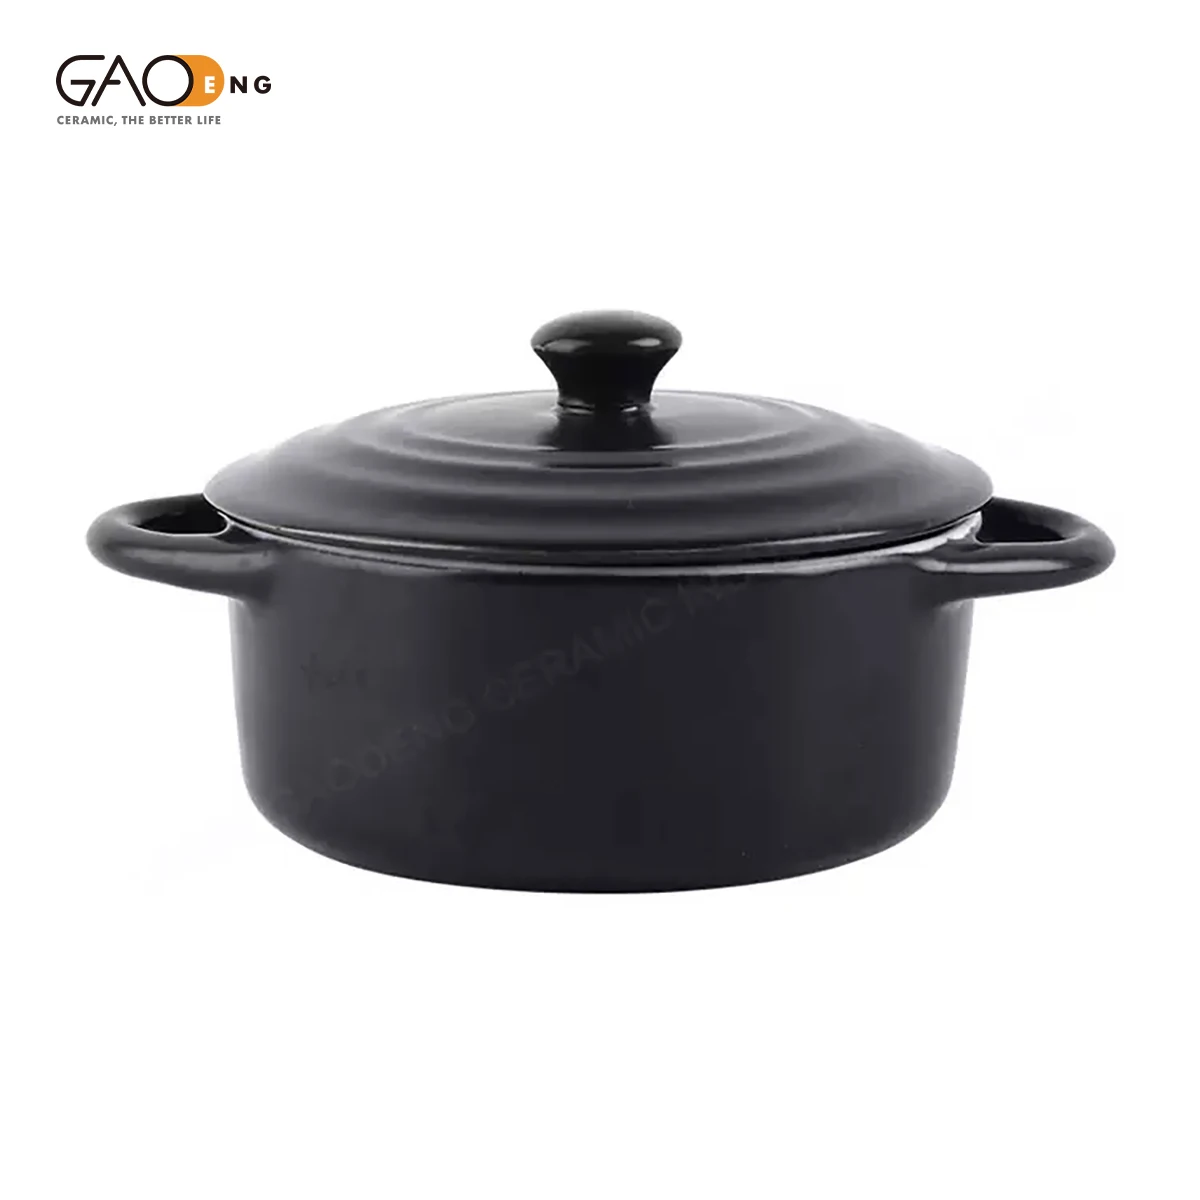 Ceramic pot Korean style matt black ceramic soup bowl with two handles and cover/lid